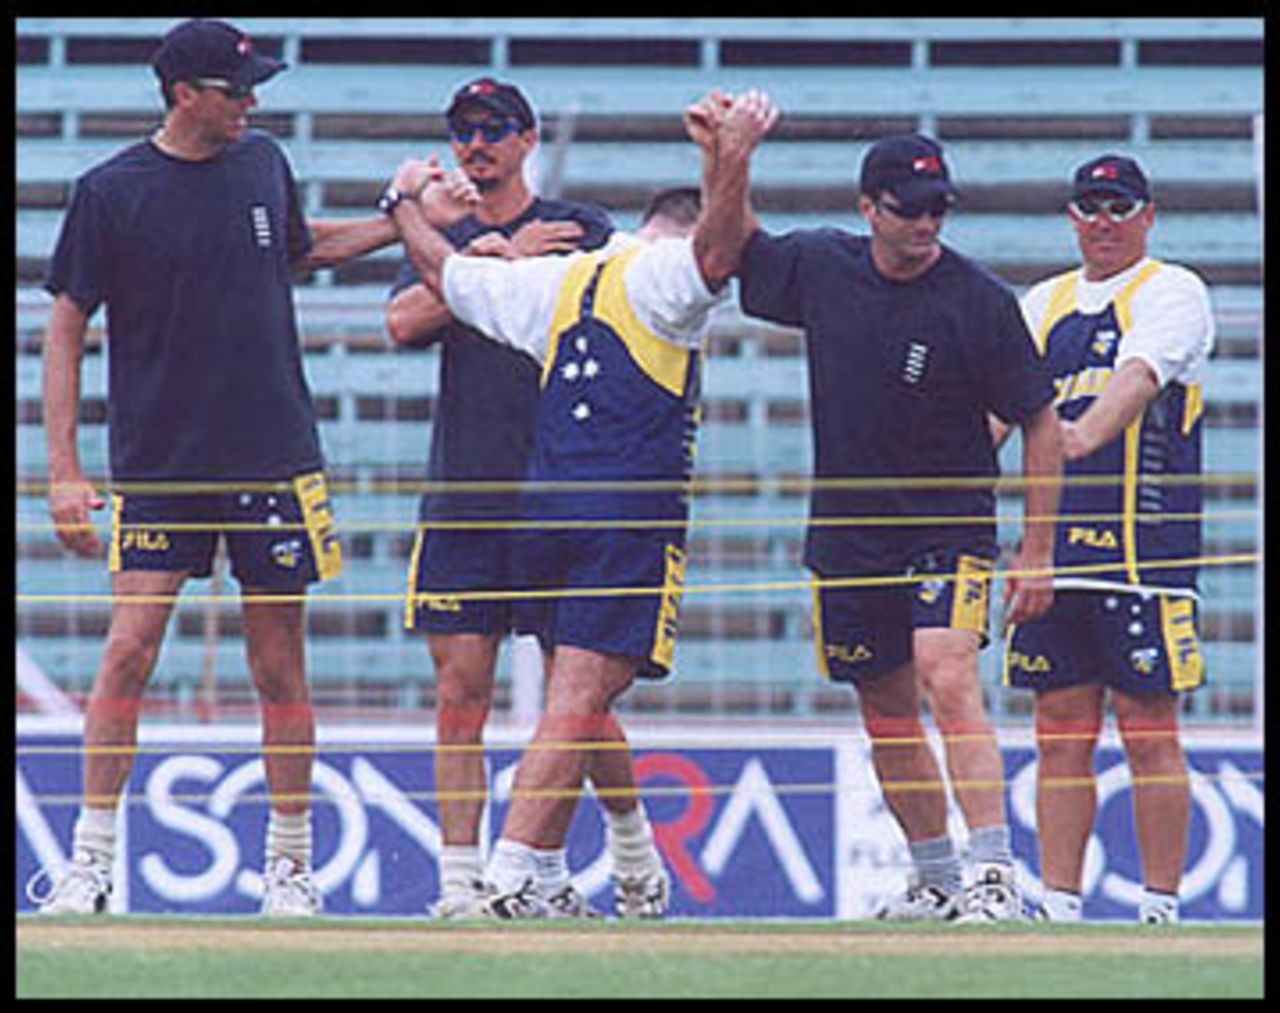 The Aussies limbering up for the big event at Wankhede Stadium, 26 Feb 2001